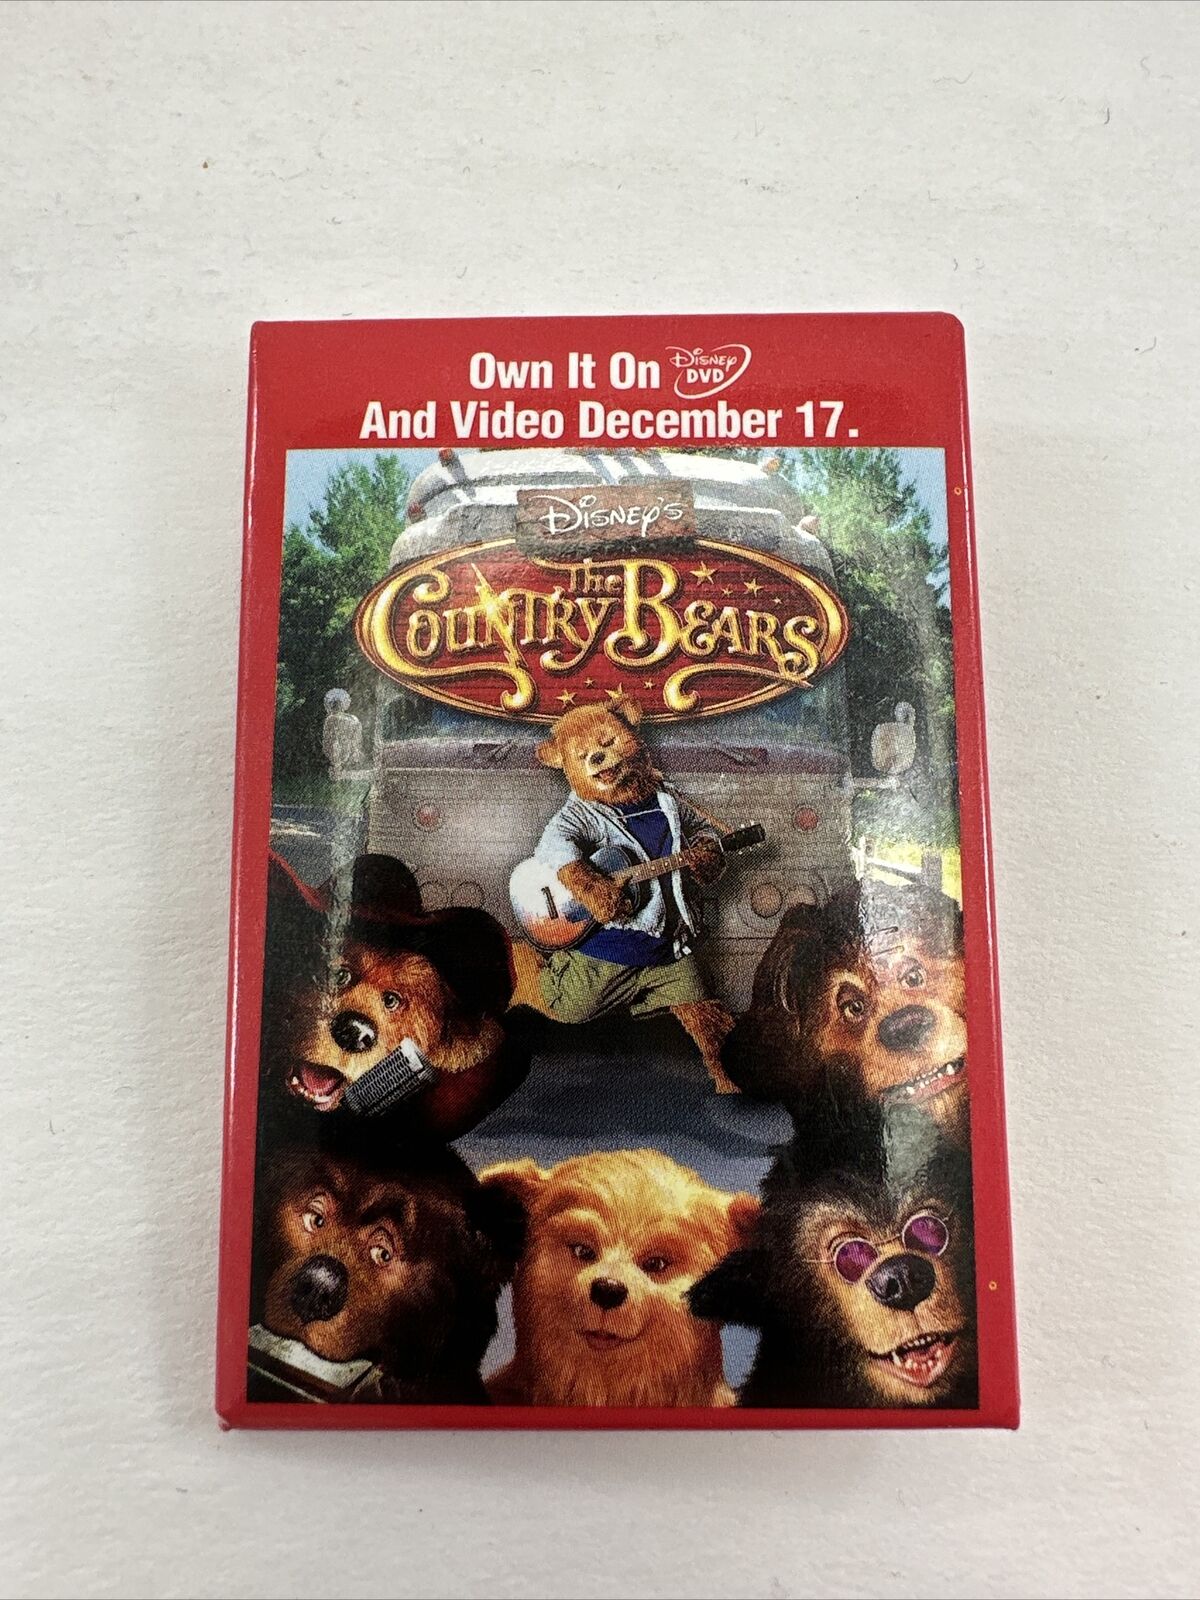 Vintage Disney The Country Bears Pin Promotional Promo Pinback Badge Button